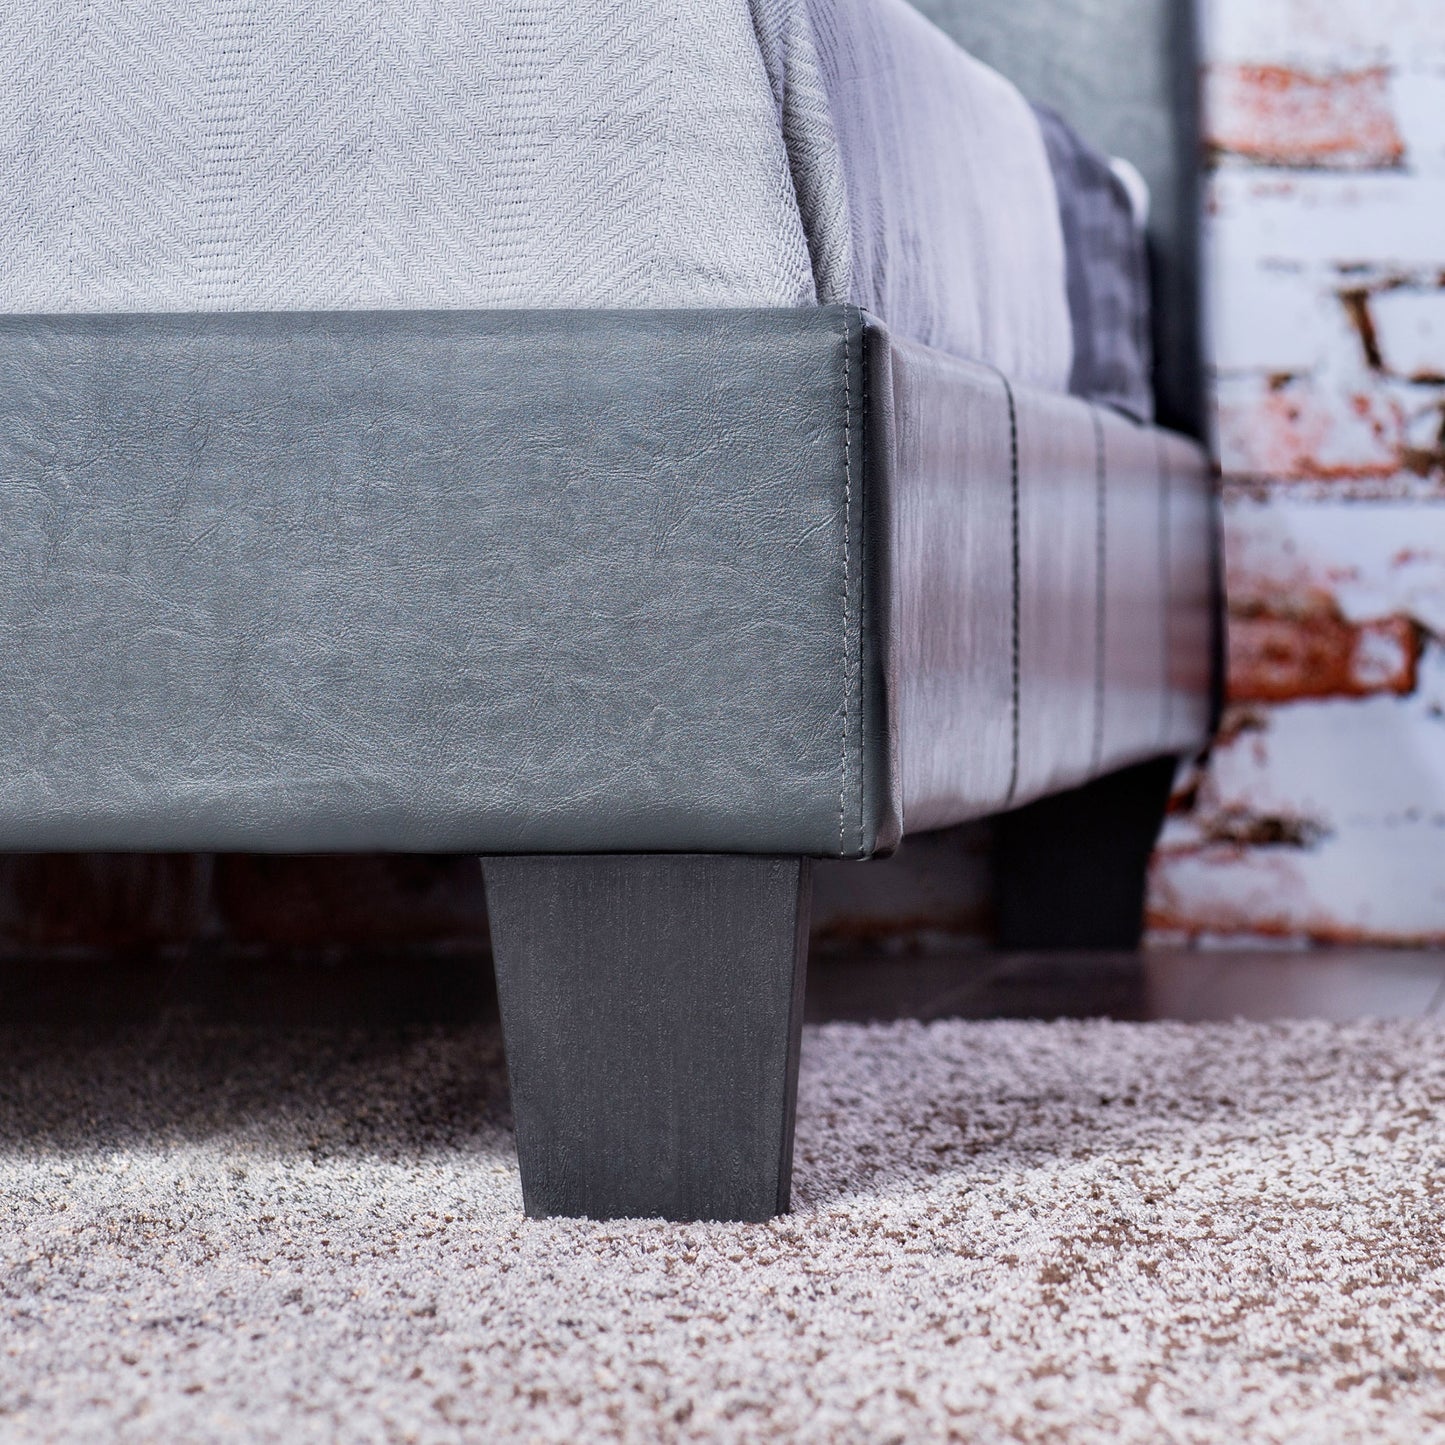 Left angled footboard/leg detail view of a contemporary gray faux leather twin platform bed in a bedroom with accessories